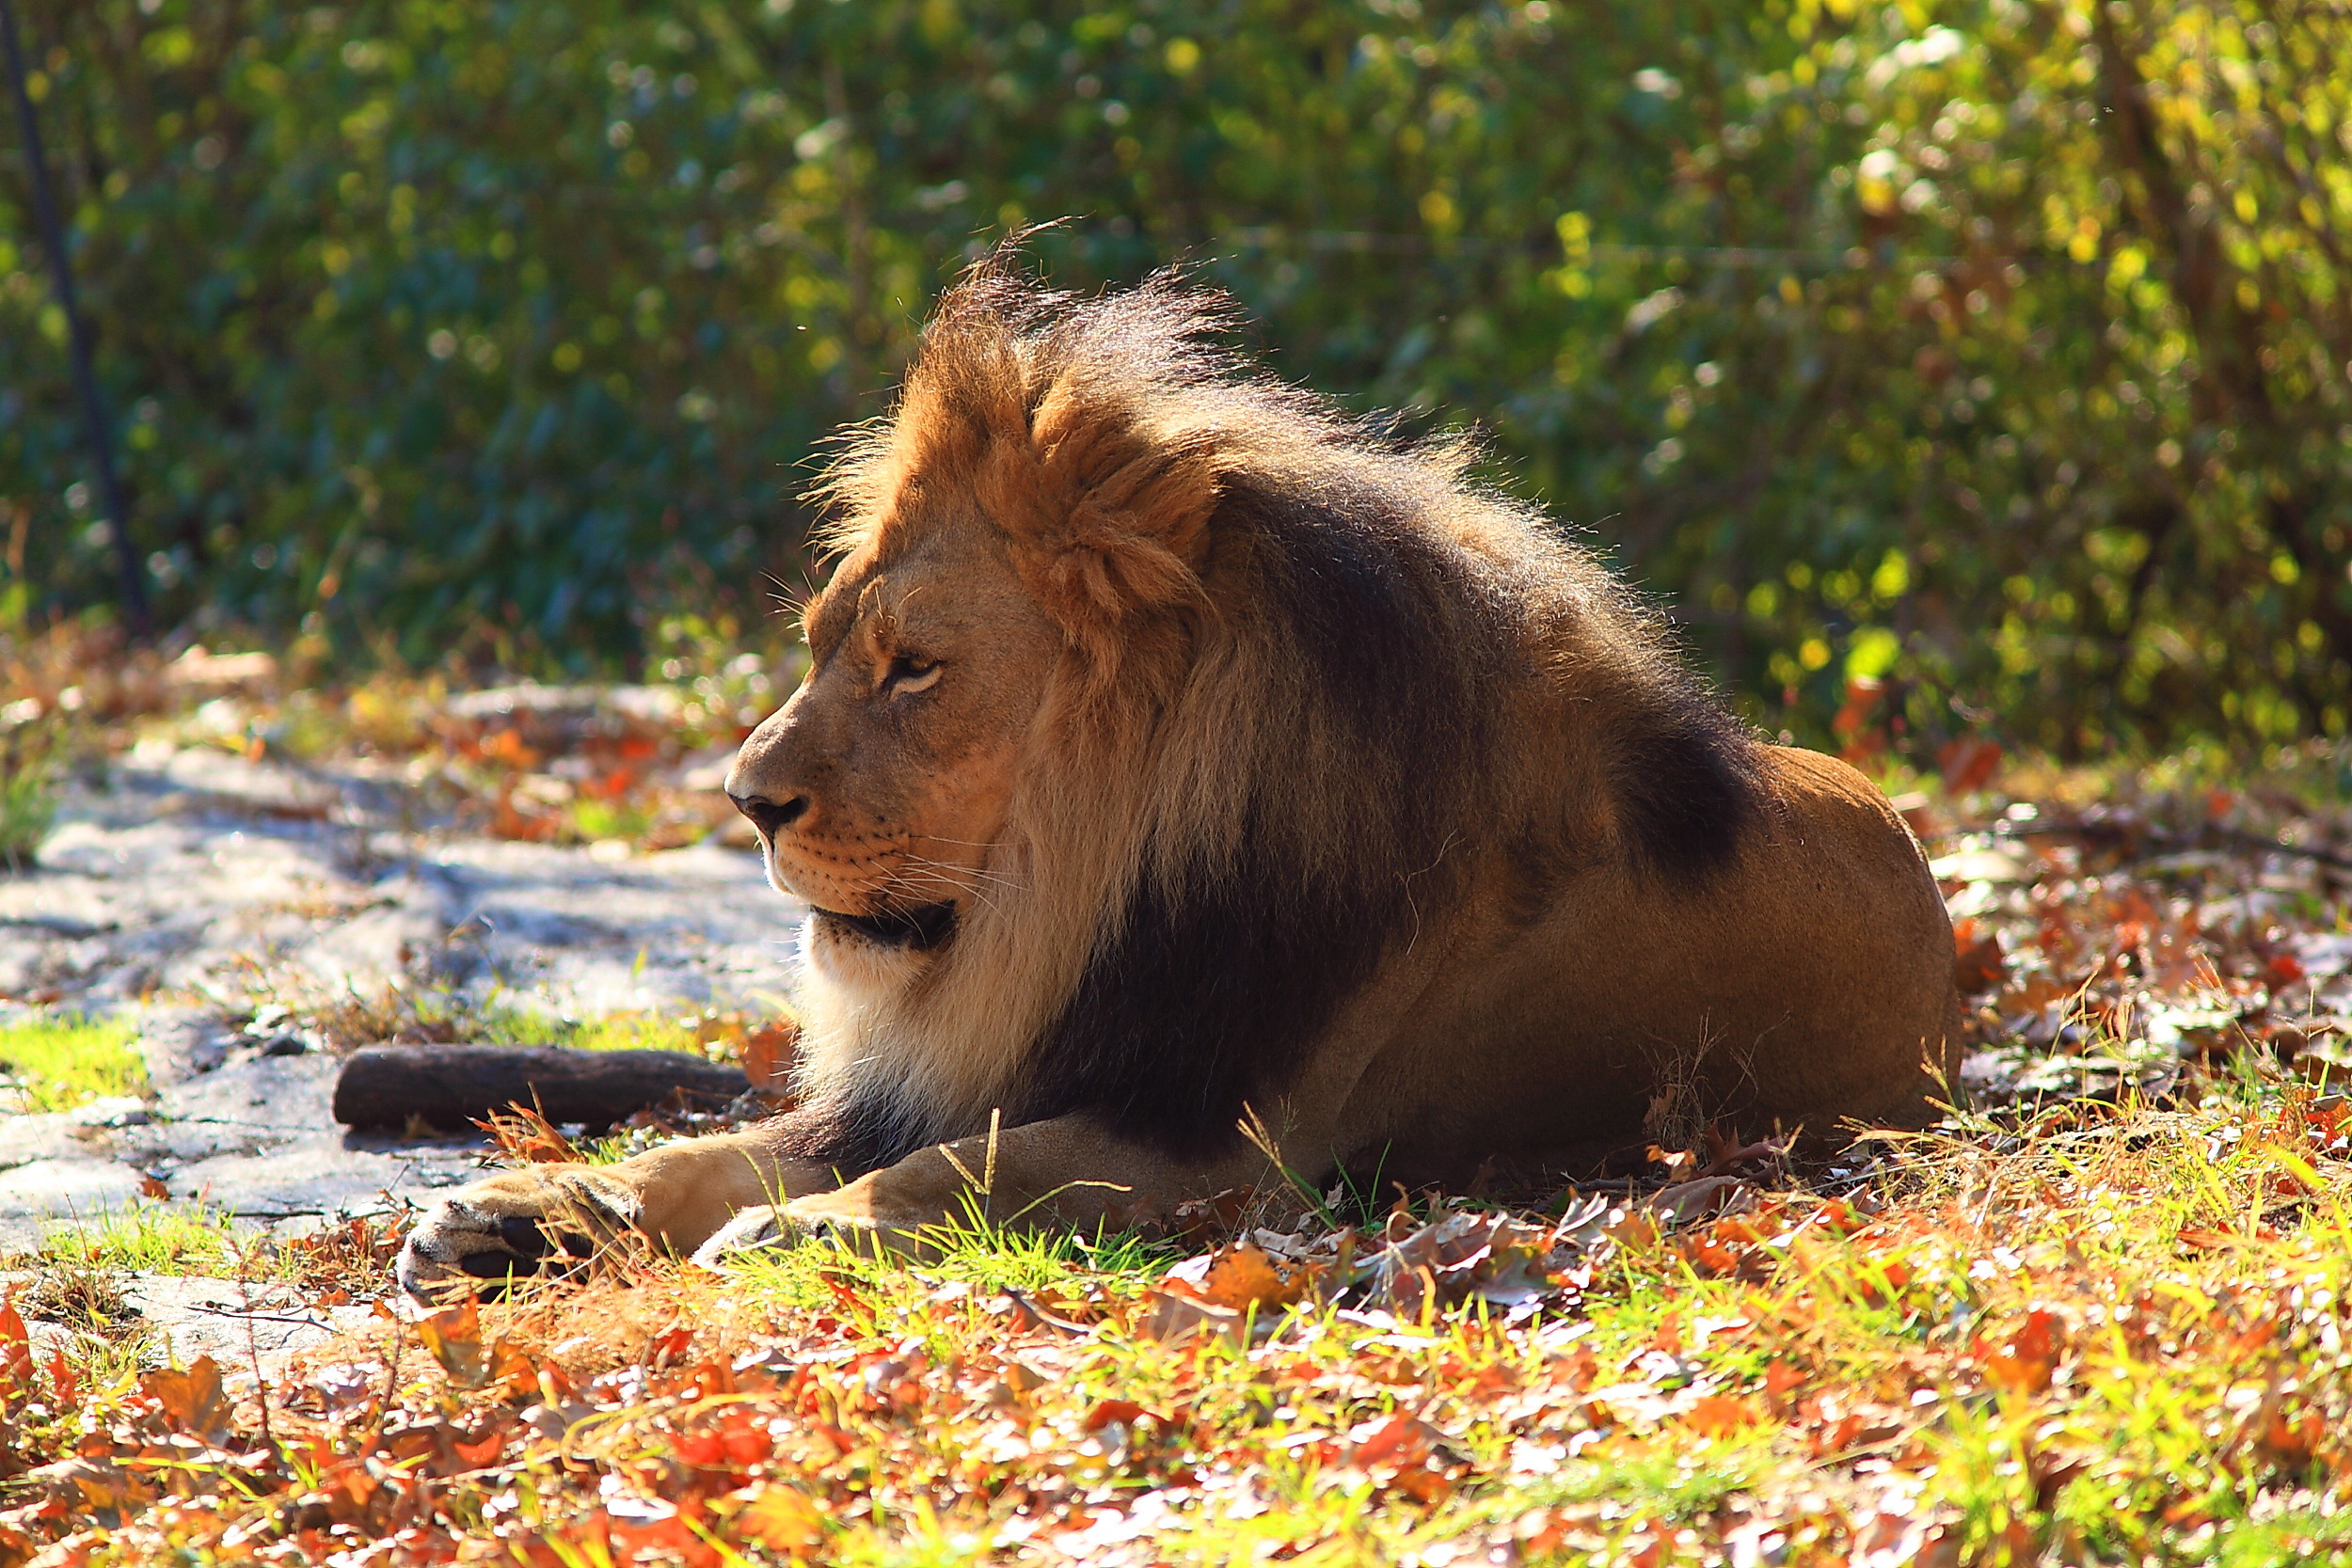 110430 download wallpaper predator, animals, autumn, lion, foliage screensavers and pictures for free